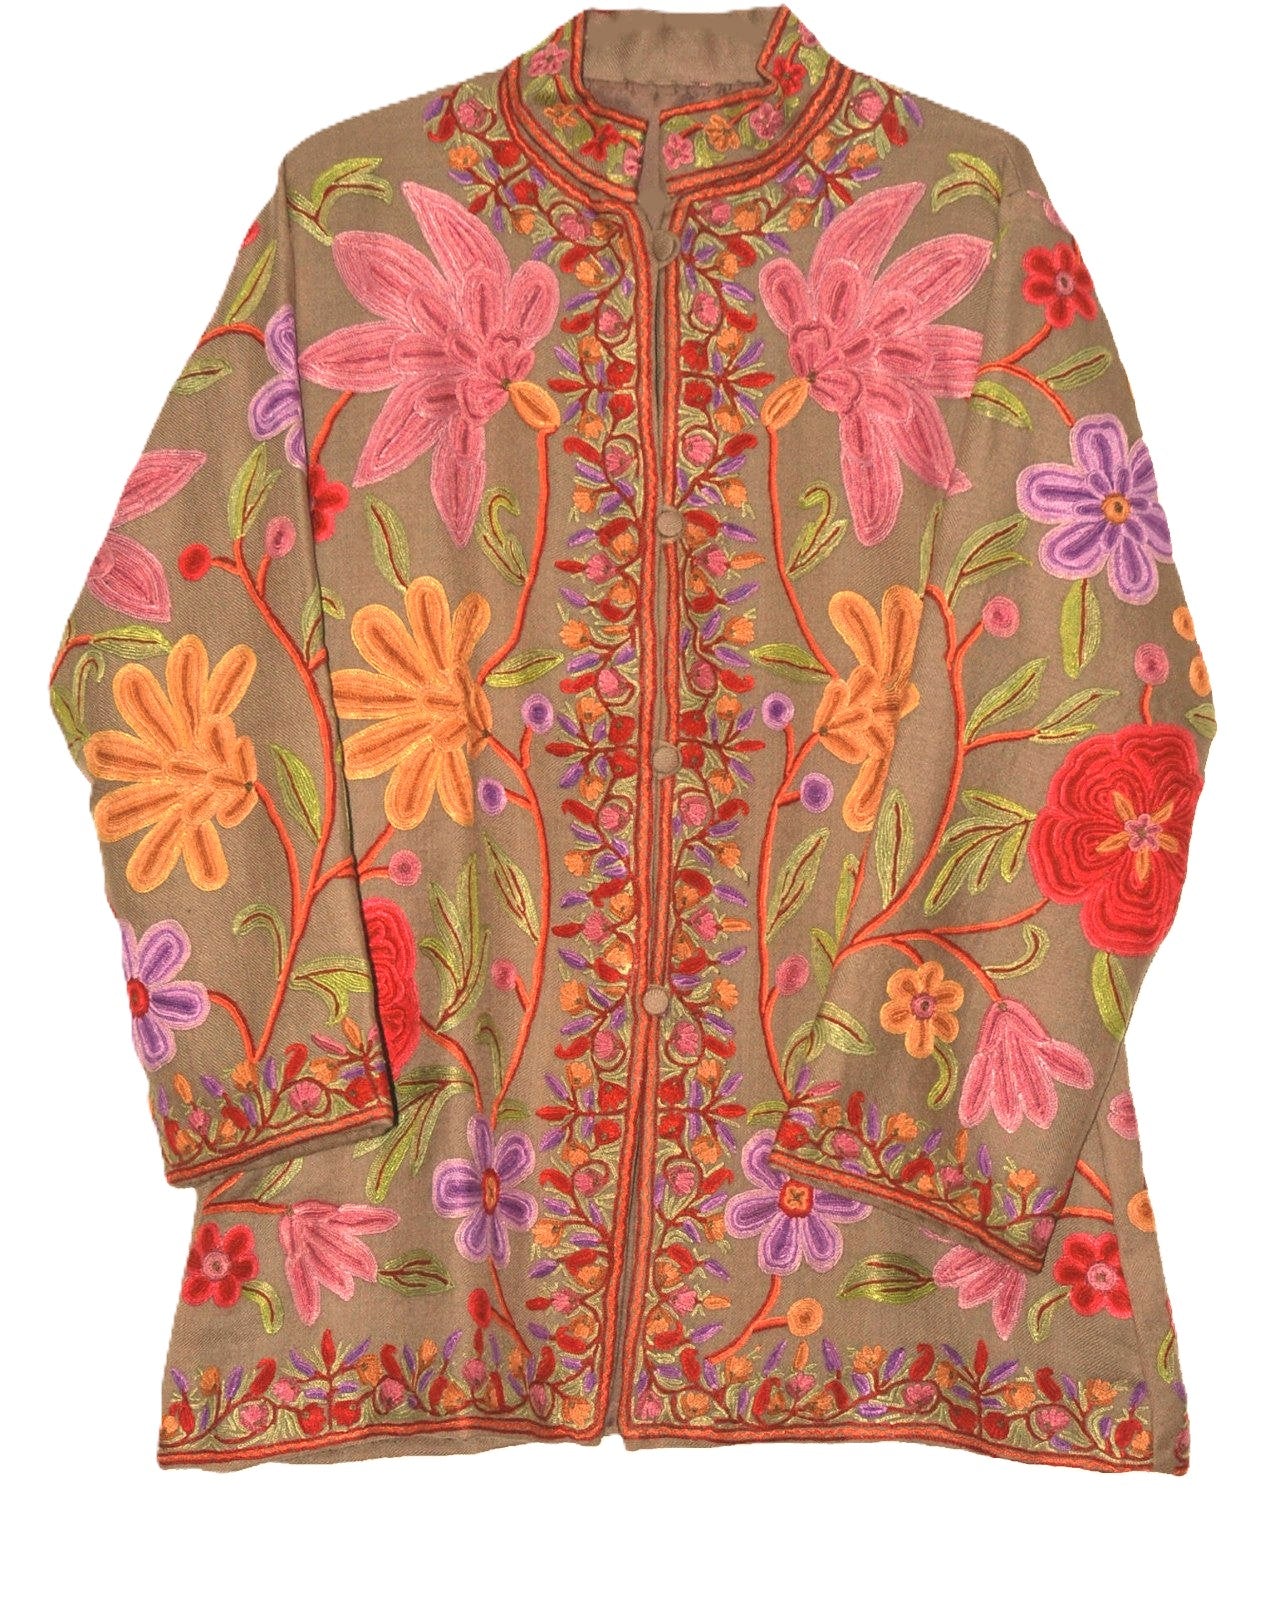 Embroidered Jacket Woolen Short Jacket Beige, Multicolor Embroidery #AO-033